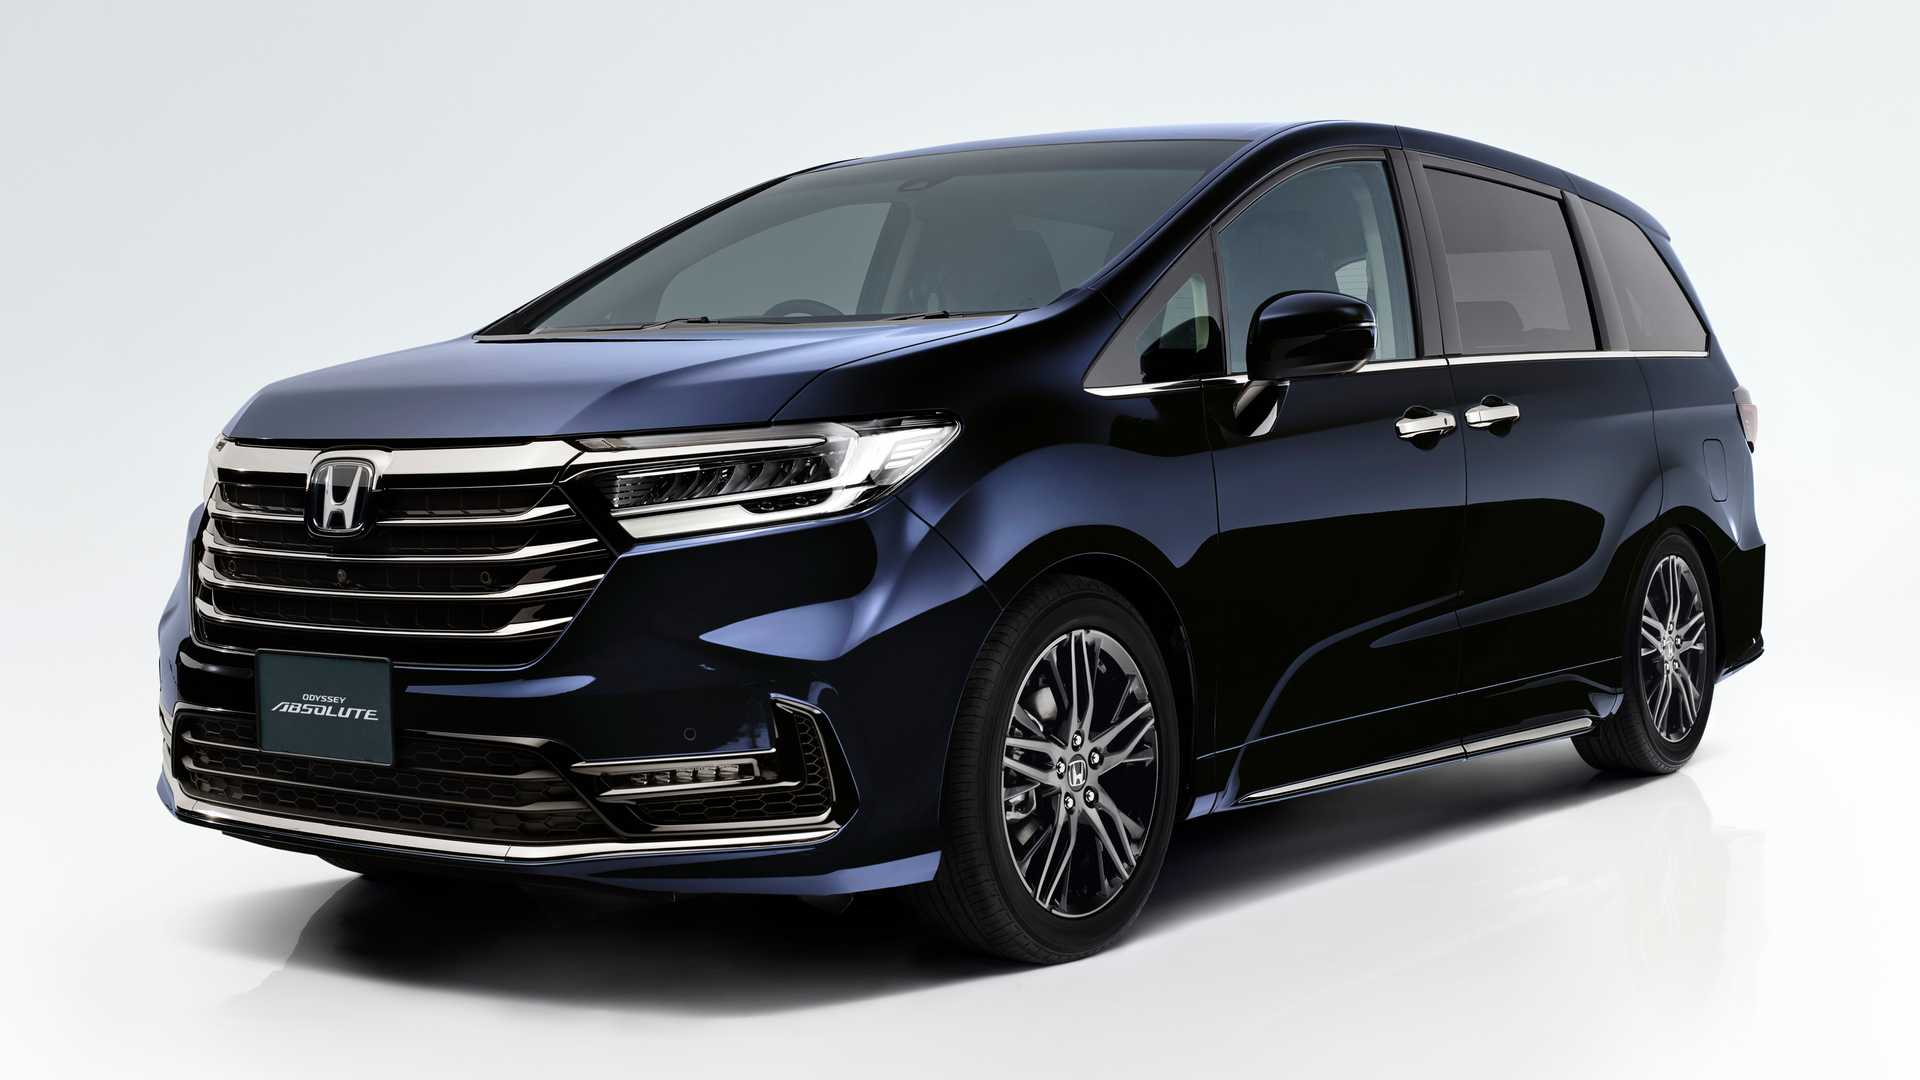 Honda Odyssey With New Look And Updates Just For Japan